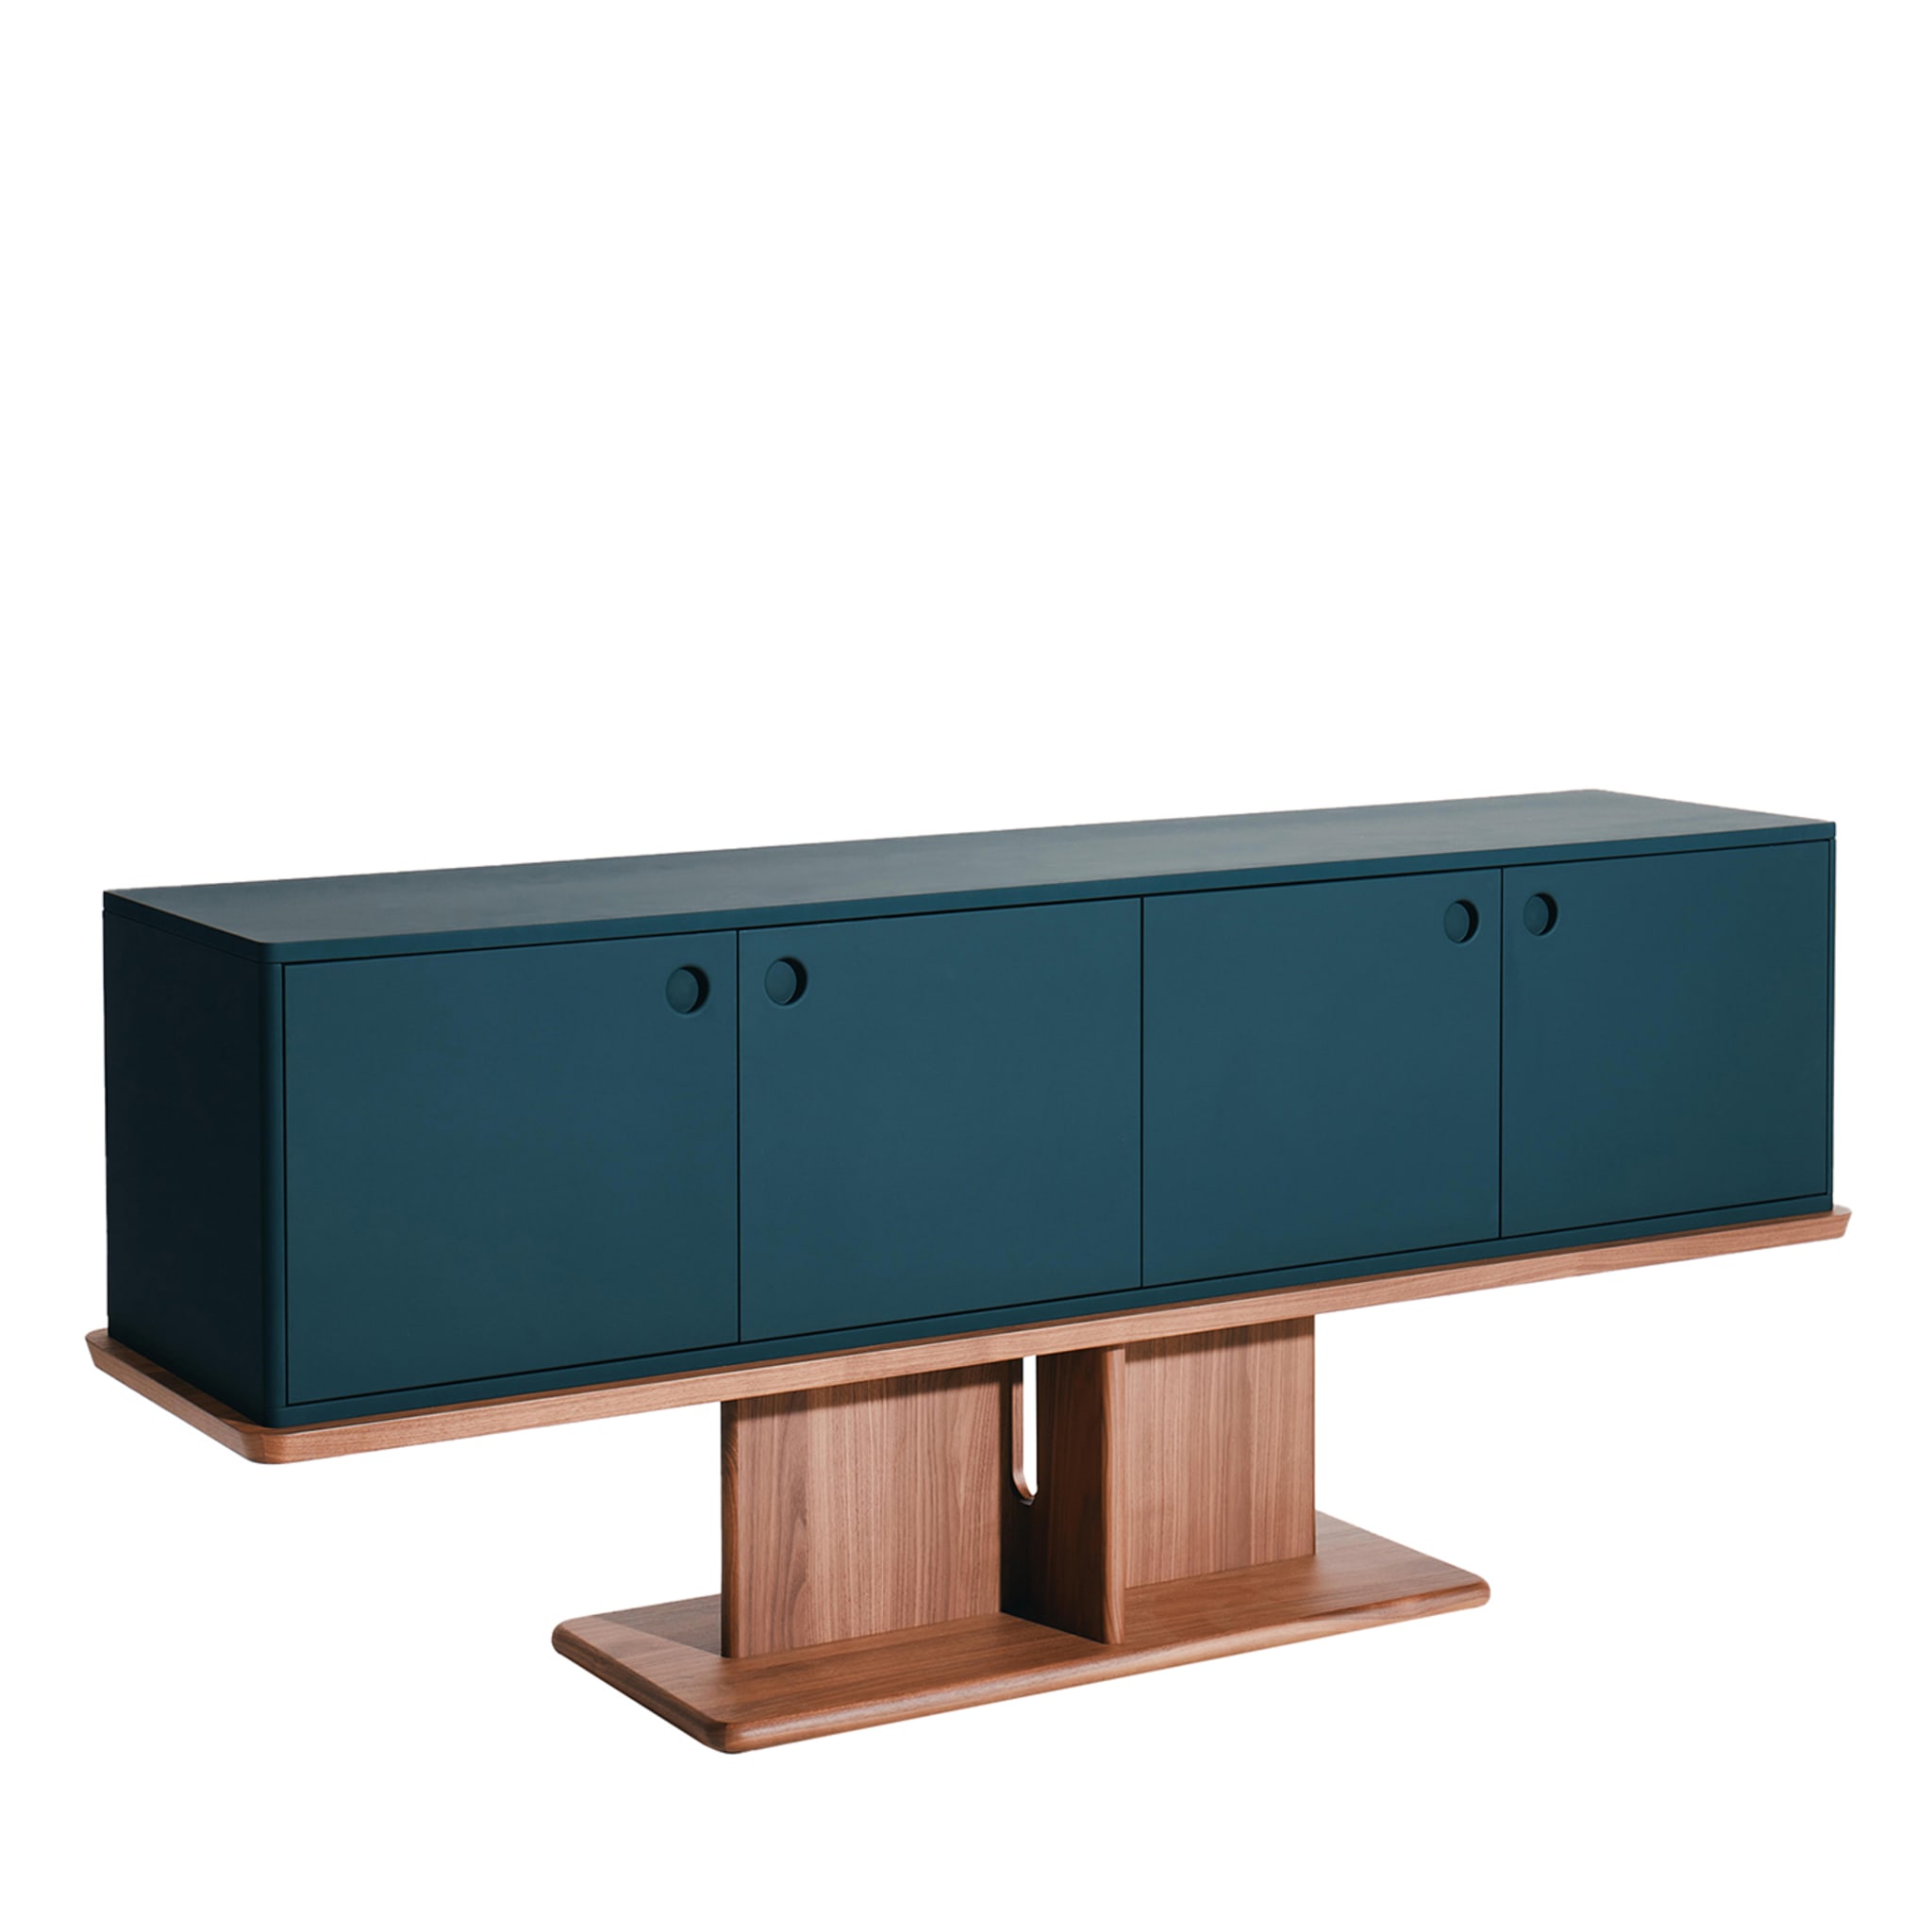 Intersection Sideboard by Neri&Hu - Main view